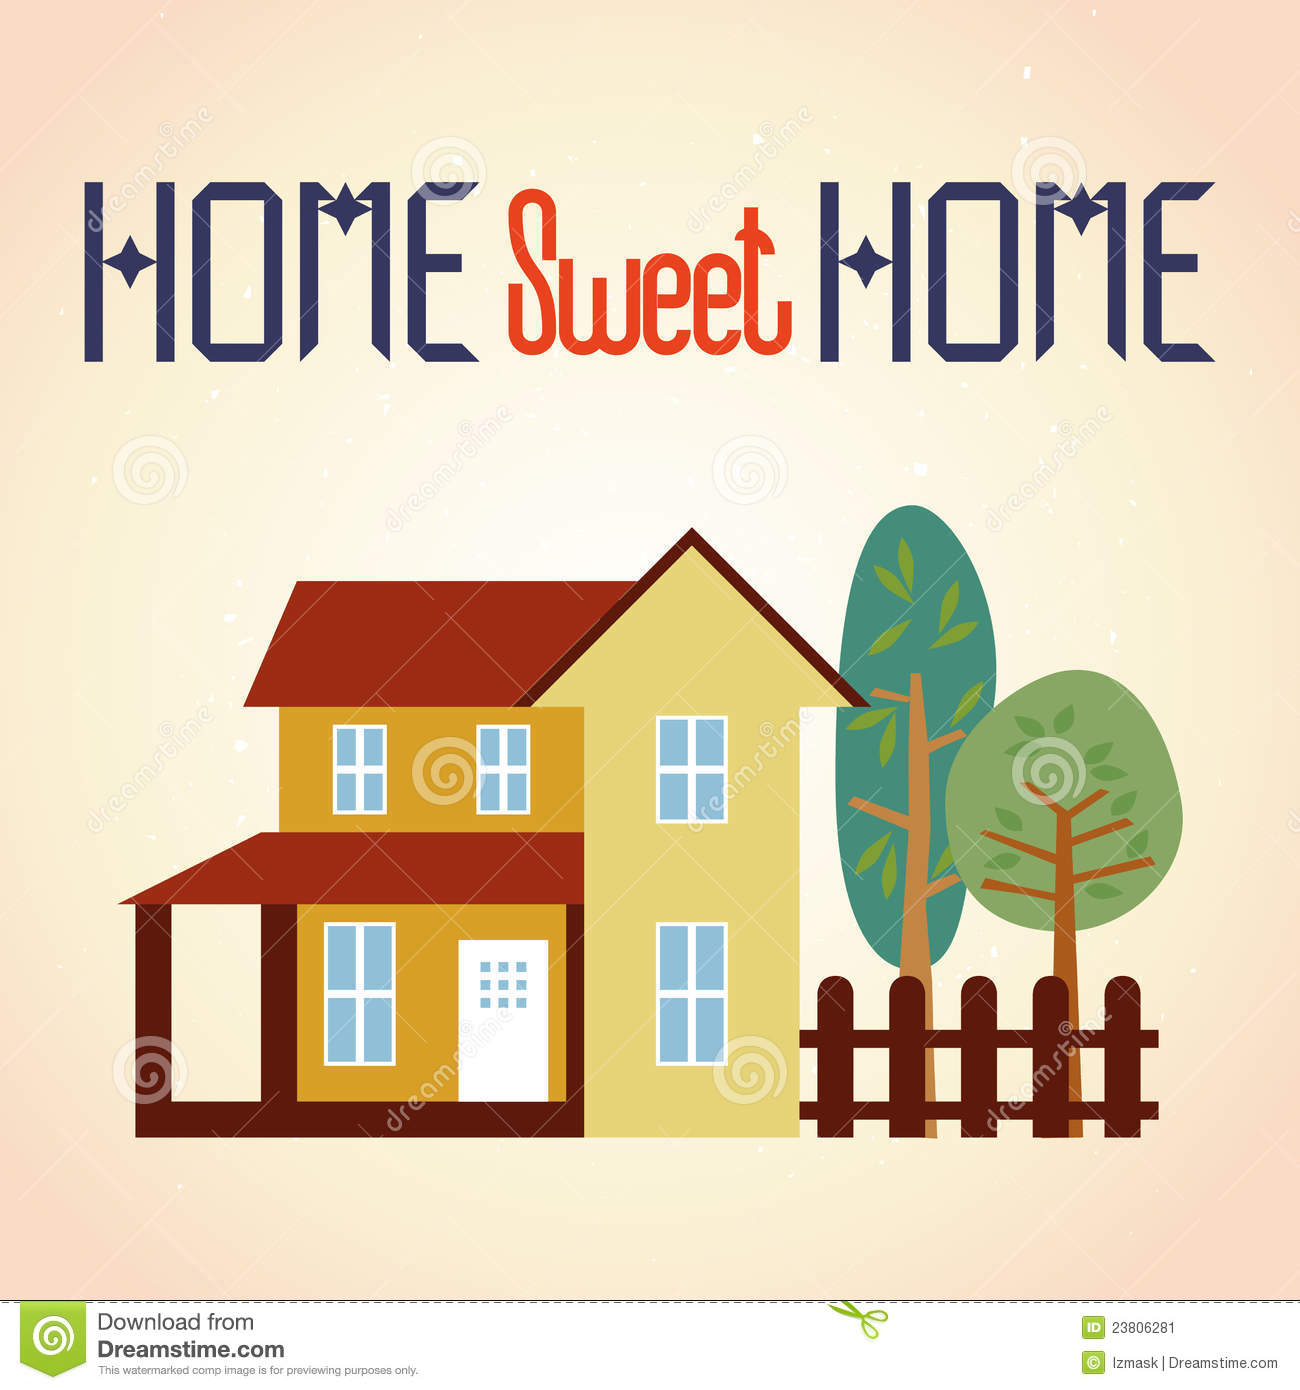 Home Sweet Home Clipart